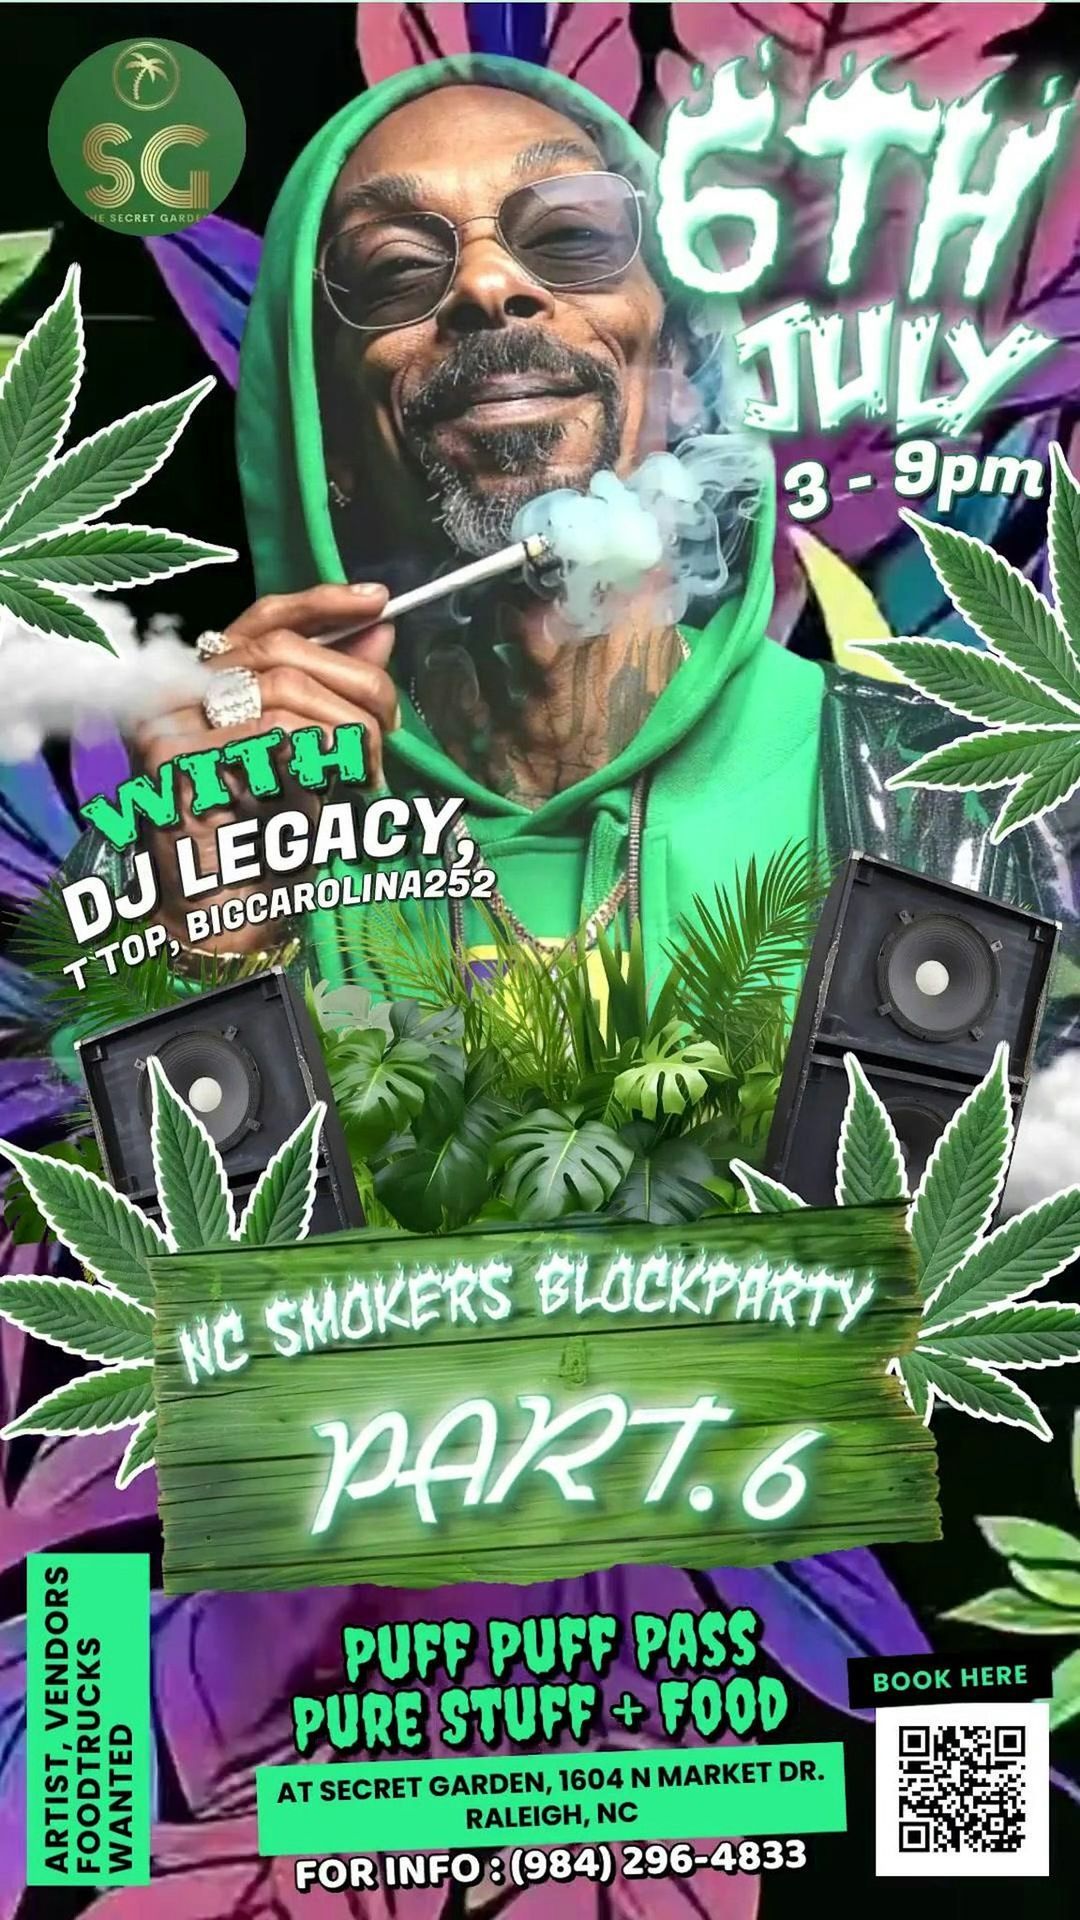 NC SMOKERS BLOCKPARTY PART .6